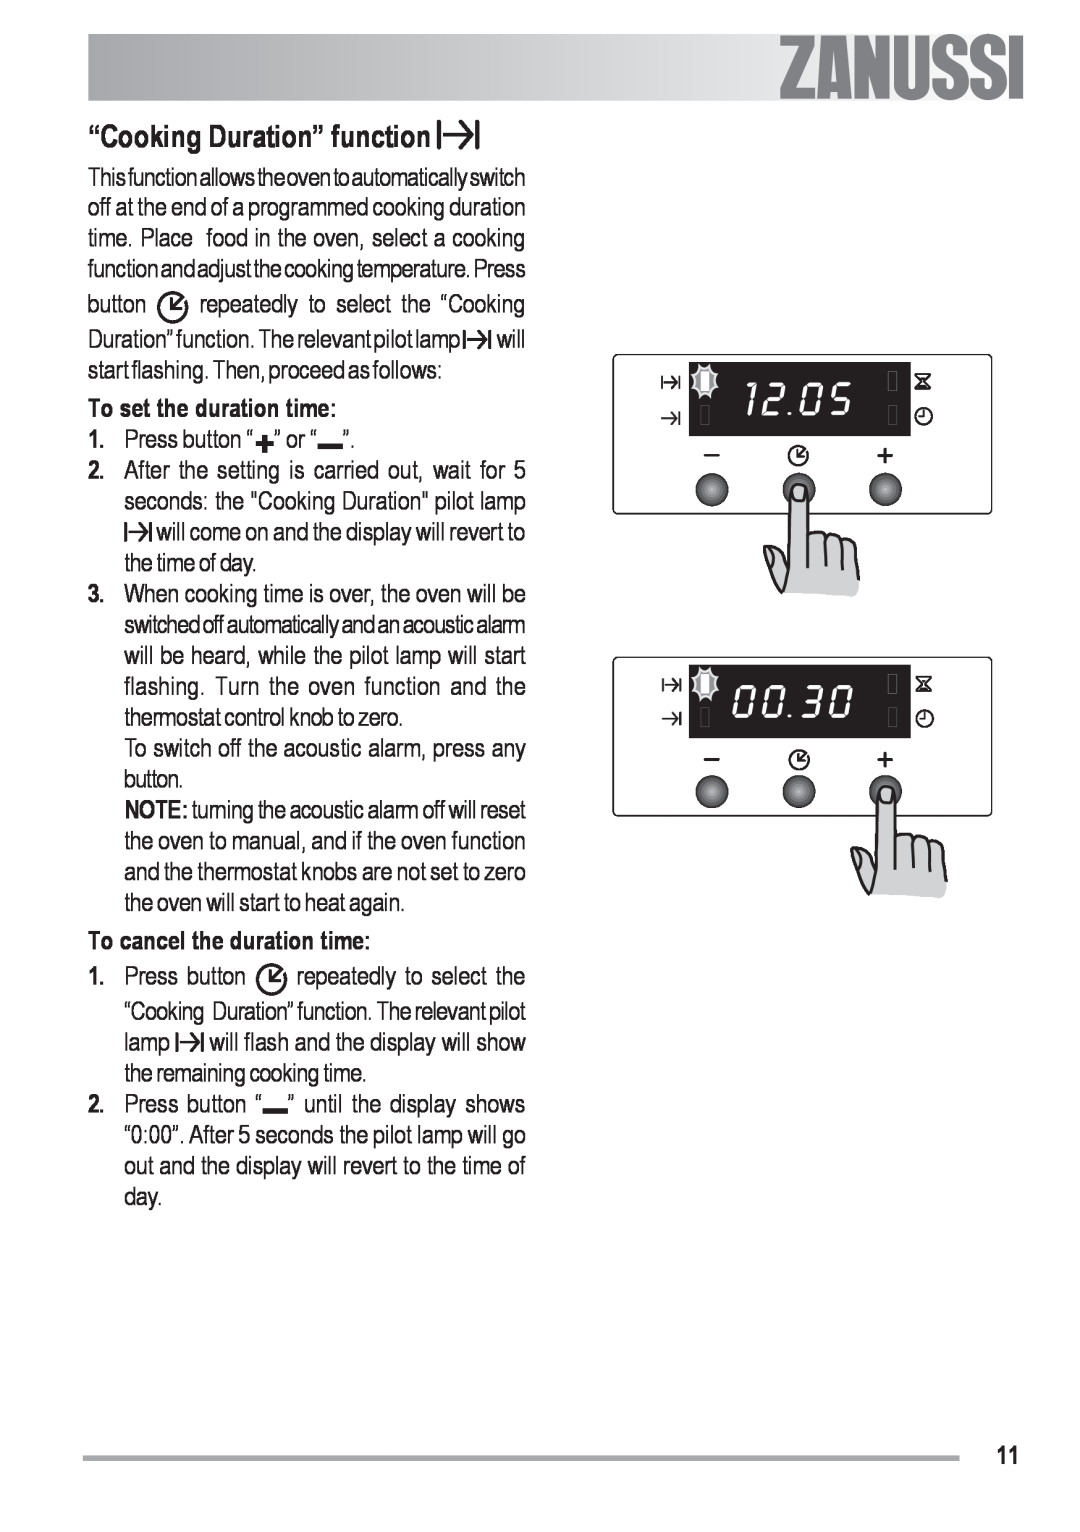 Zanussi ZOB 330 manual “Cooking Duration” function, To set the duration time, To cancel the duration time 